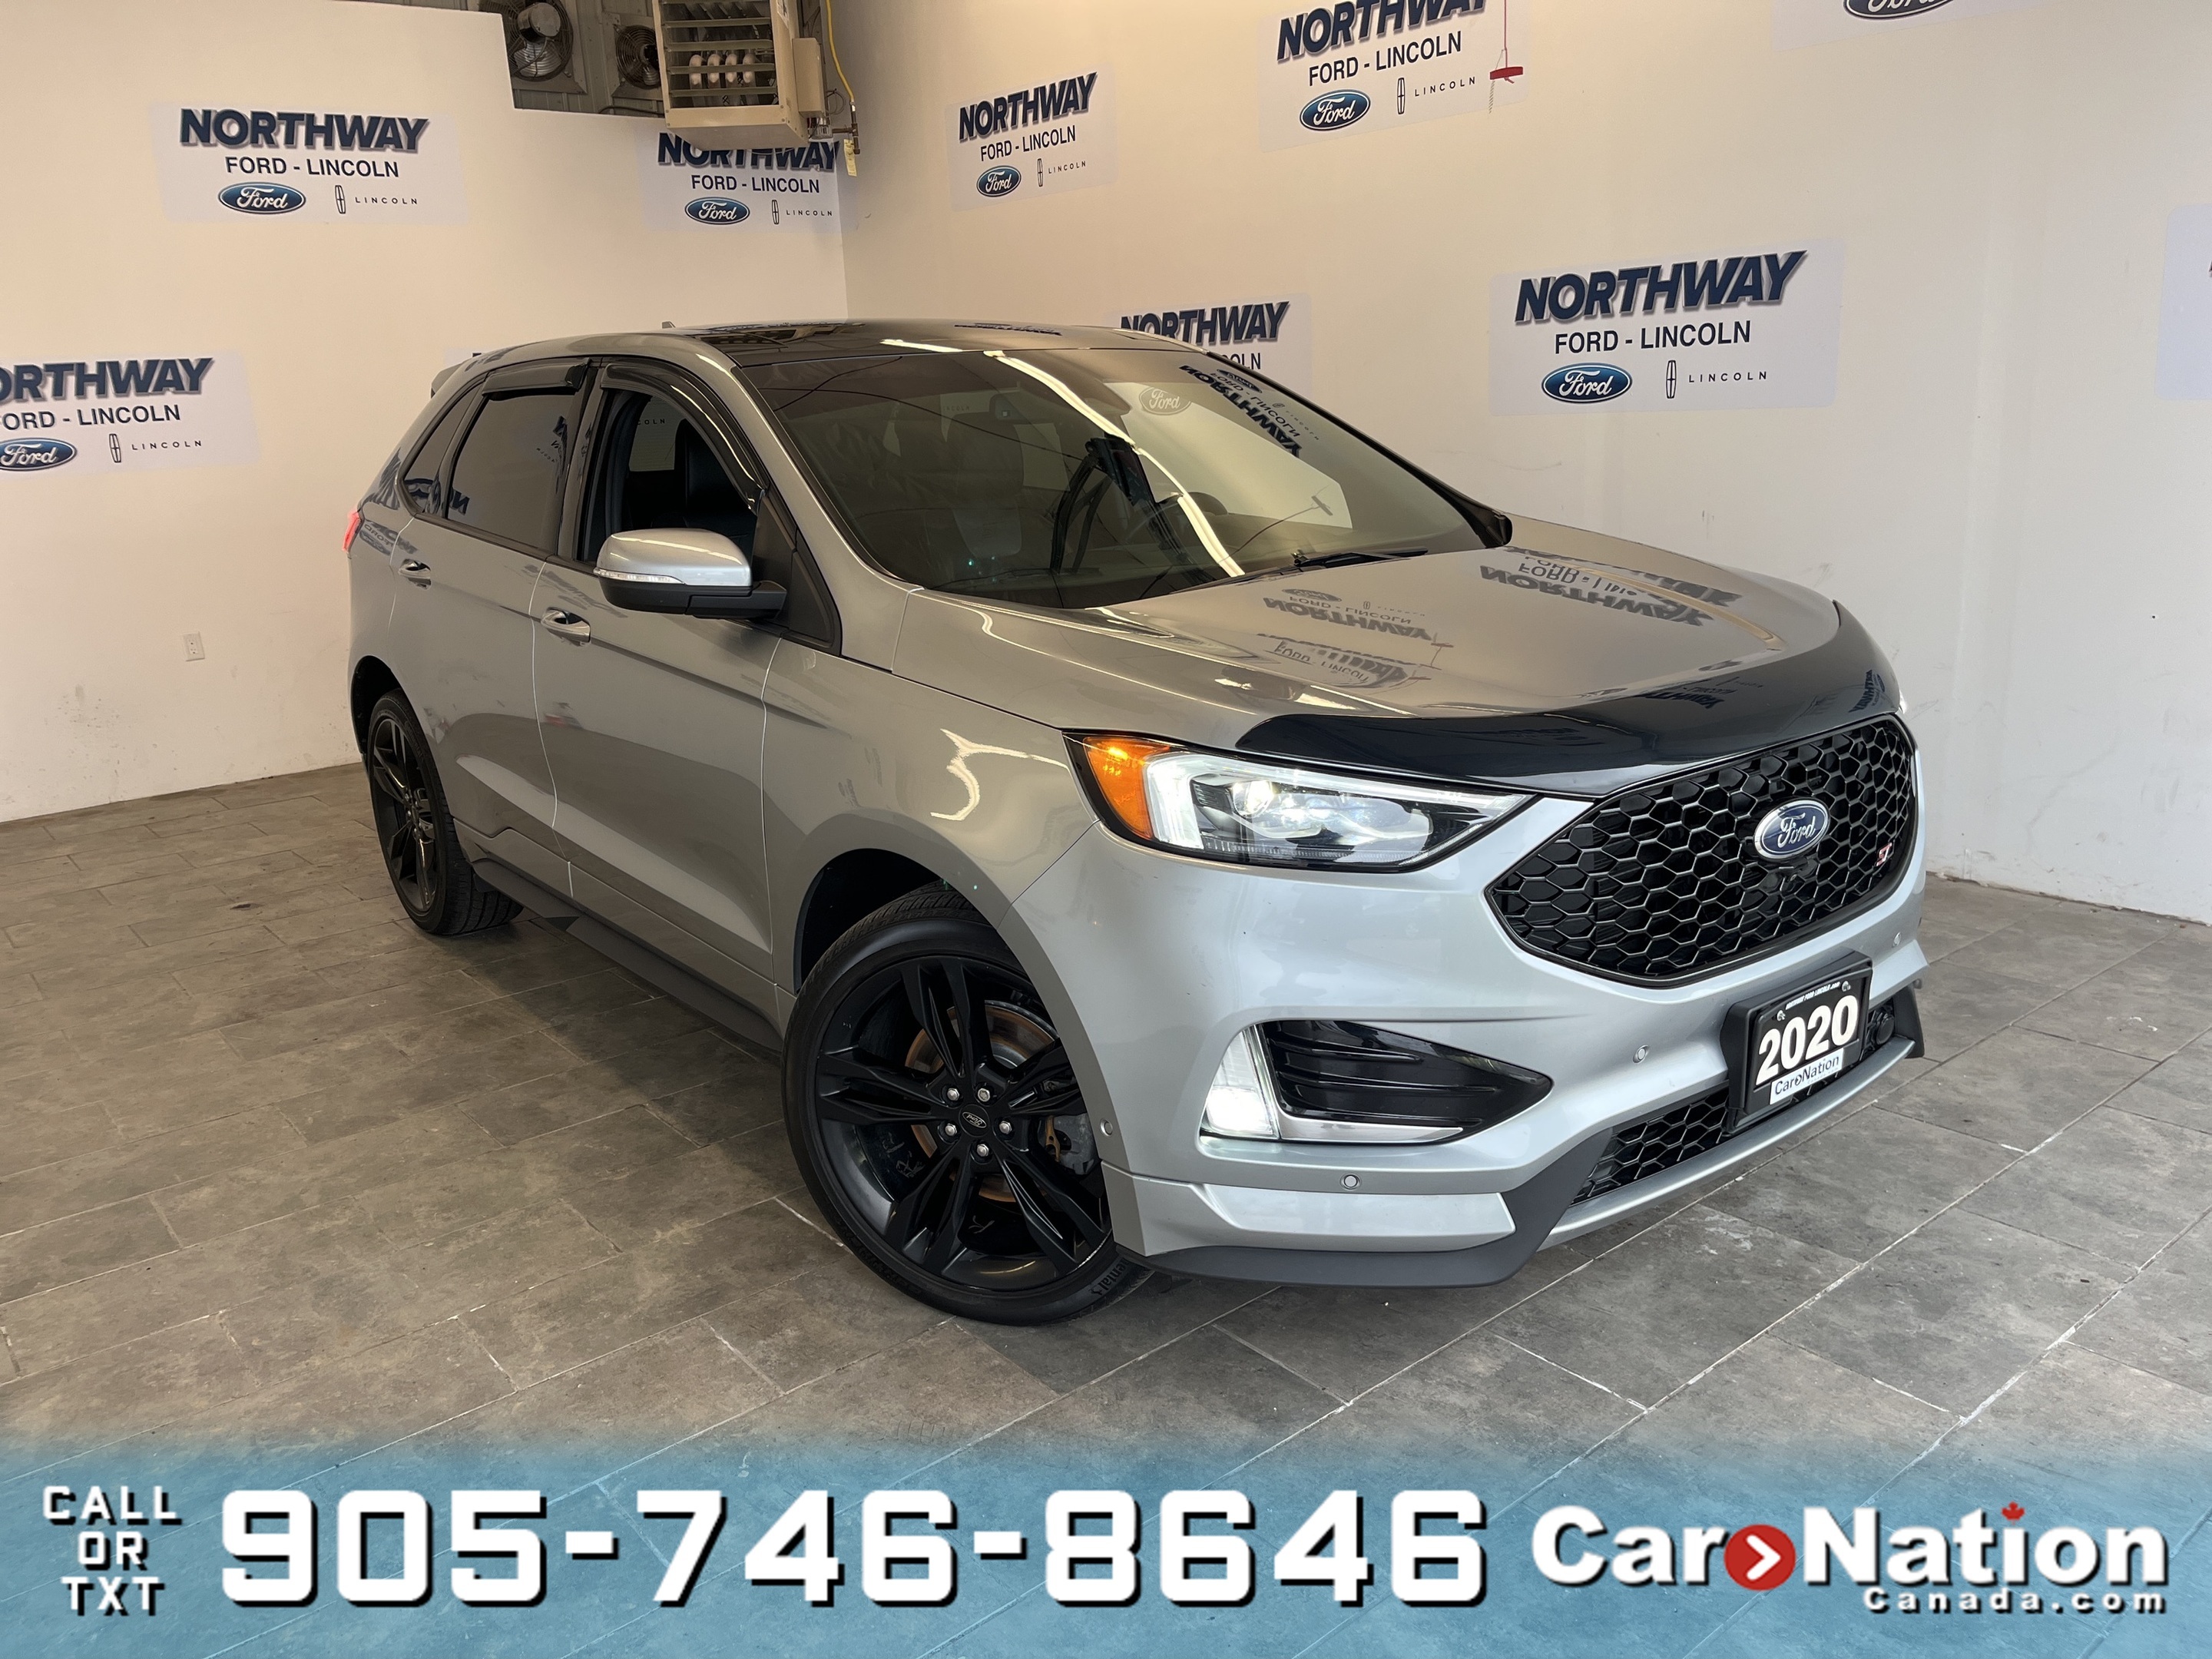 2020 Ford Edge ST | AWD |401A | PANO ROOF | SUEDE | 21" RIMS |NAV